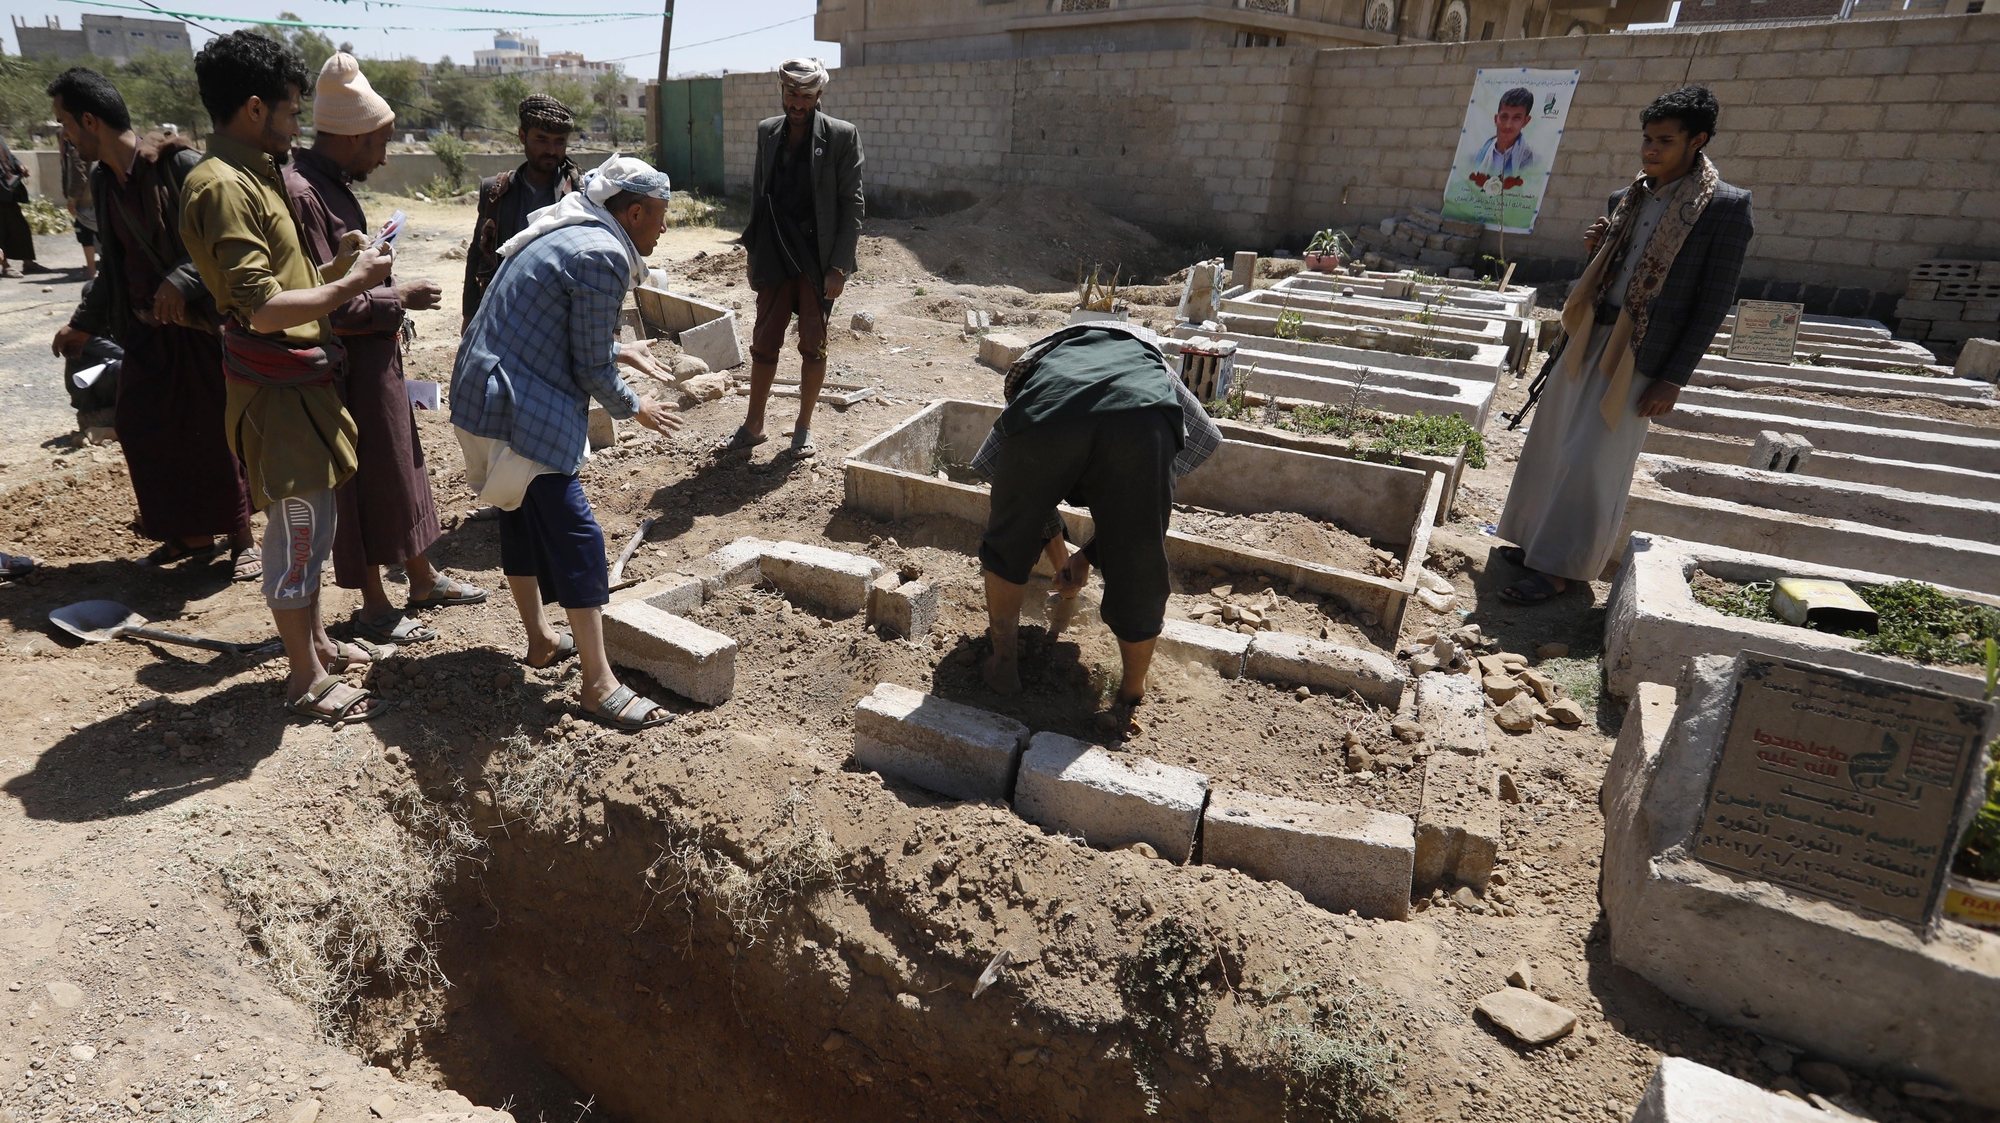 epa09527254 Yemenis bury the body of a slain Houthi fighter near a freshly dug grave during a funeral at a cemetery dedicated to slain Houthi fighters, in Sana&#039;a, Yemen, 16 October 2021. Saudi-led coalitionâ€™s airstrikes have allegedly targeted Houthi reinforcements heading to the front lines in the Yemeni province of Marib, killing more than 180 Houthi fighters in the past two days as the Houthis intensify their offensive in quest for control of the oil-rich province, the Yemeni government&#039;s last northern stronghold. The UN has estimated that at least 235 civilians were killed or injured during hostilities in Yemen in September 2021, the second highest monthly death toll in two years of ongoing conflict and the Saudi-led bombing campaign.  EPA/YAHYA ARHAB